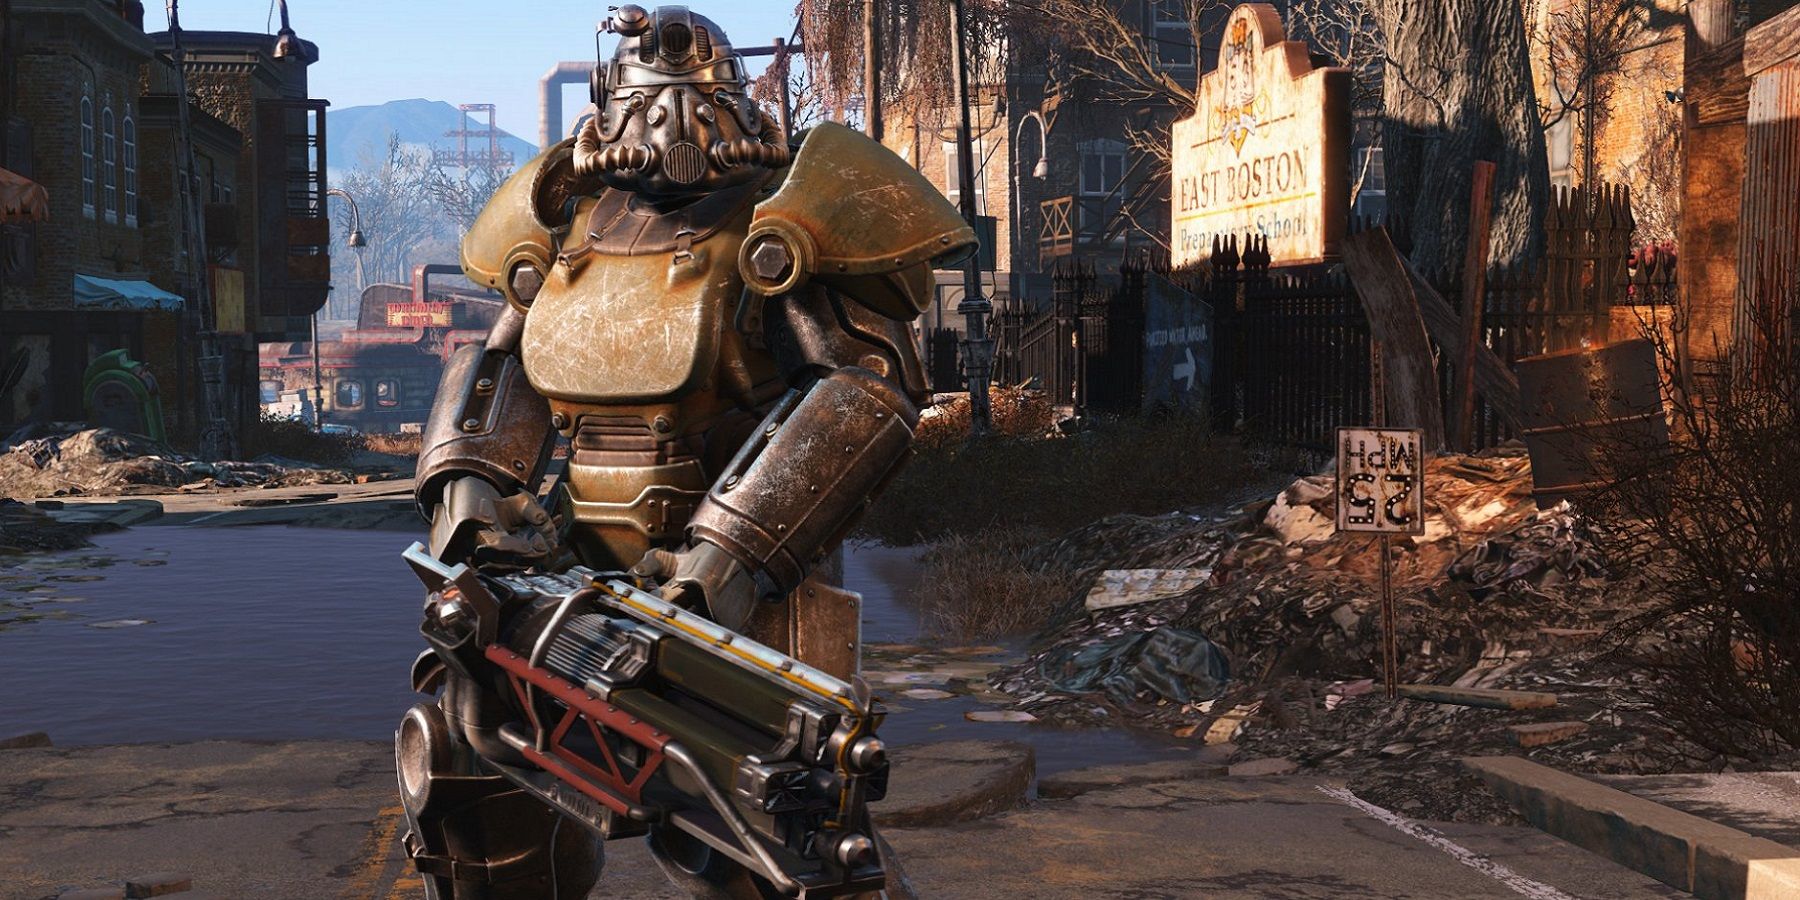 Image from Fallout 4 showing a member of the Brotherhood of Steel holding a Gatling Laser.